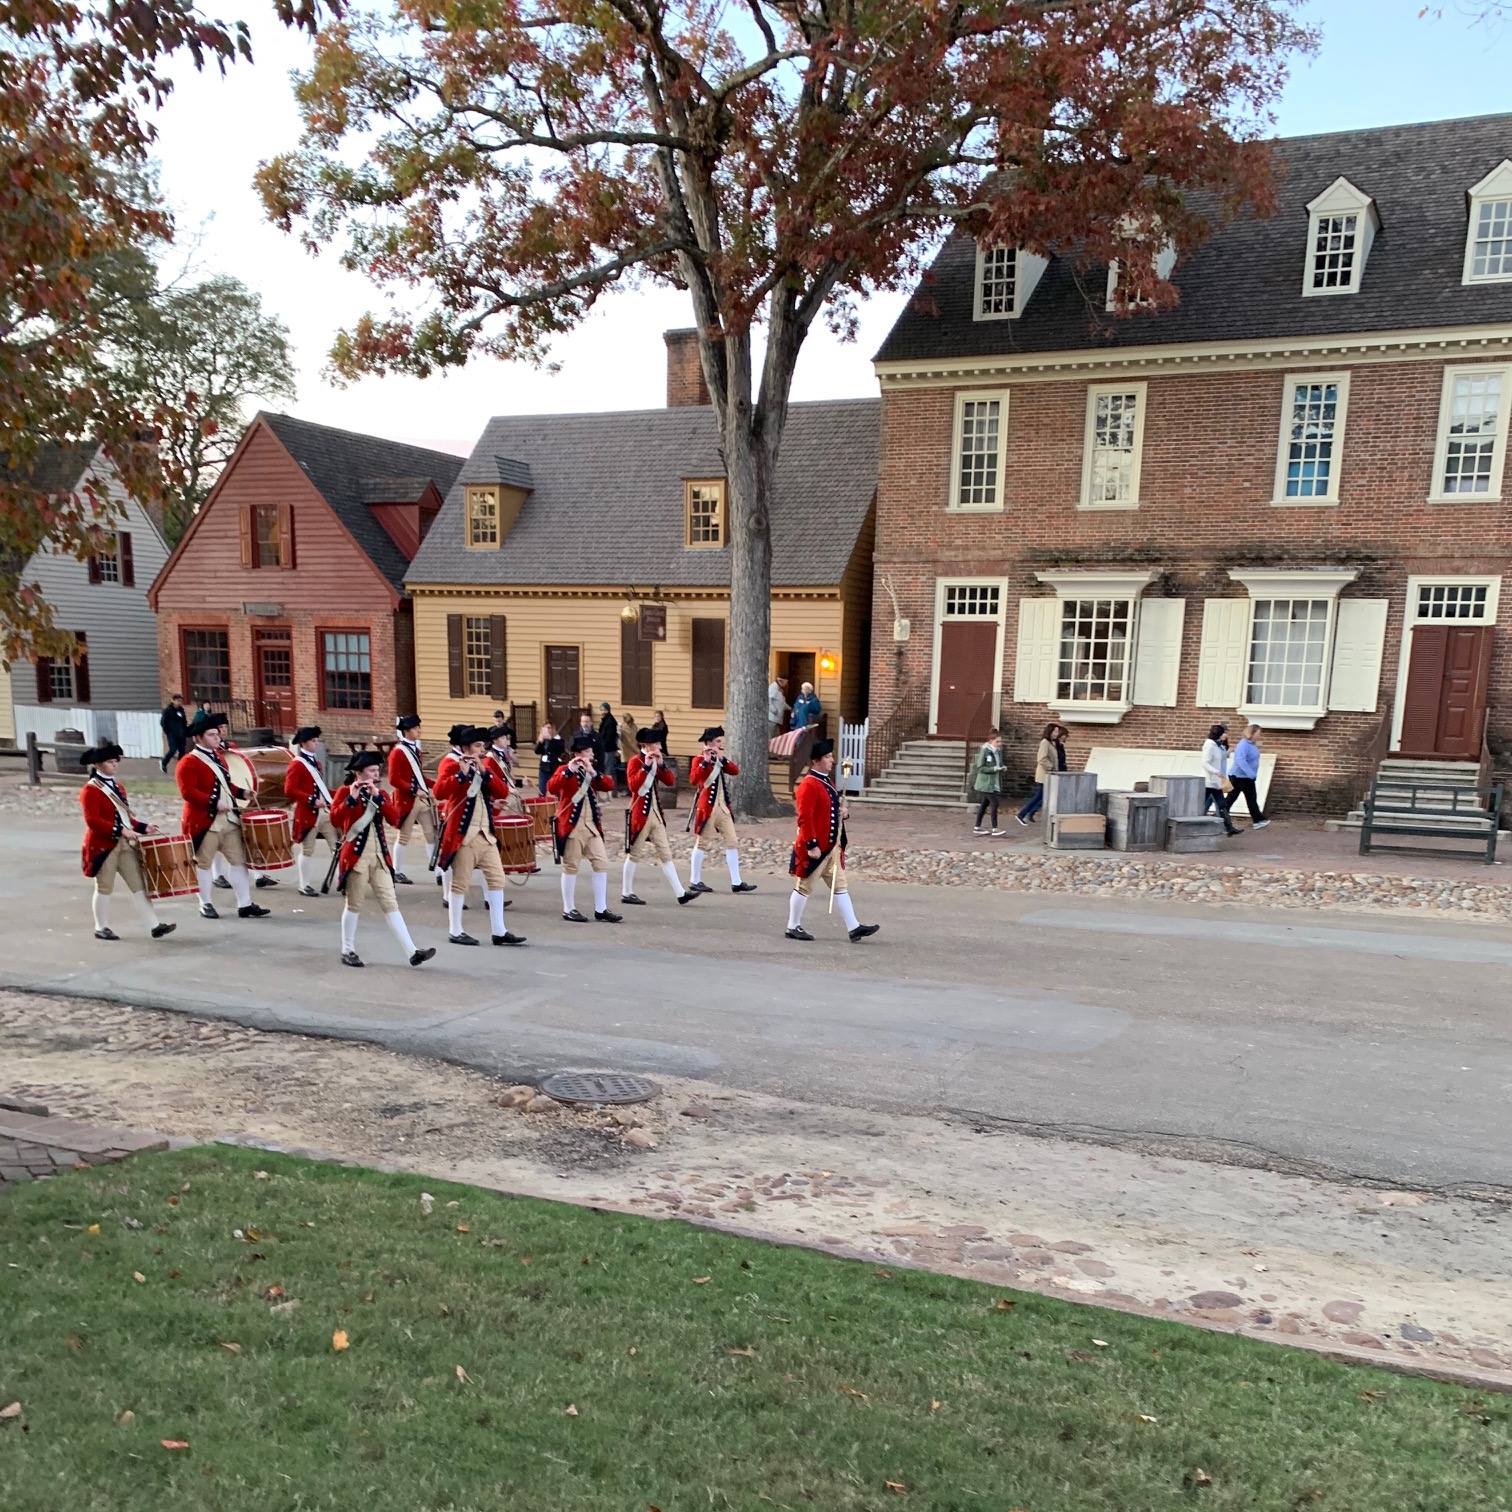 The Colonial Williamsburg Fifes and Drums march down the street wearing the distinctive red coats of British military uniforms.